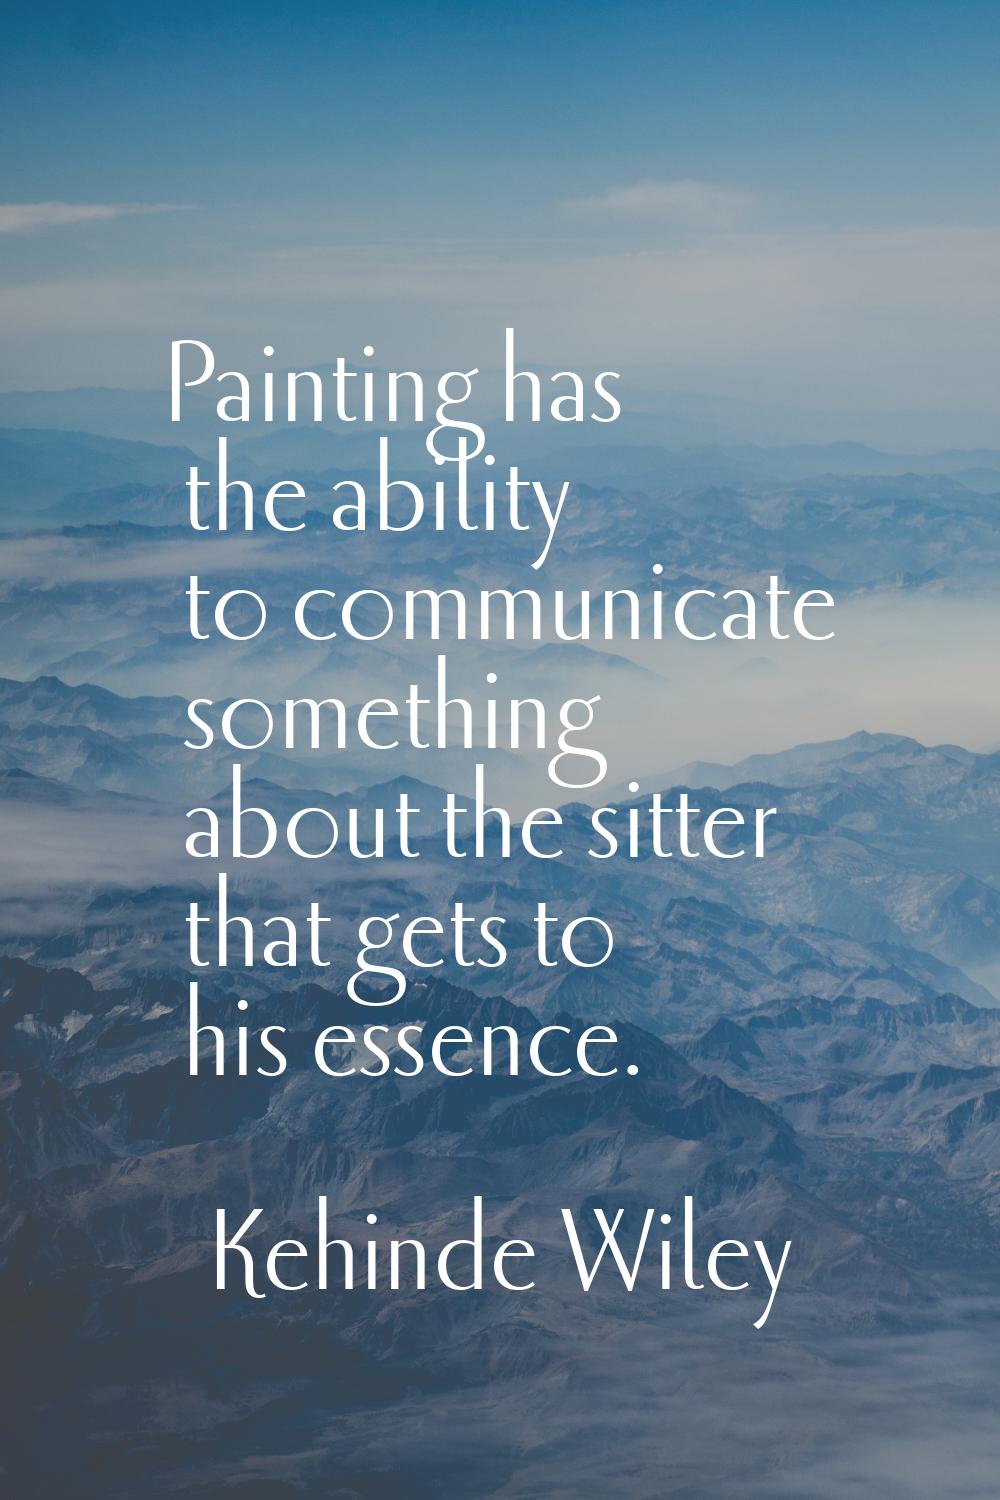 Painting has the ability to communicate something about the sitter that gets to his essence.